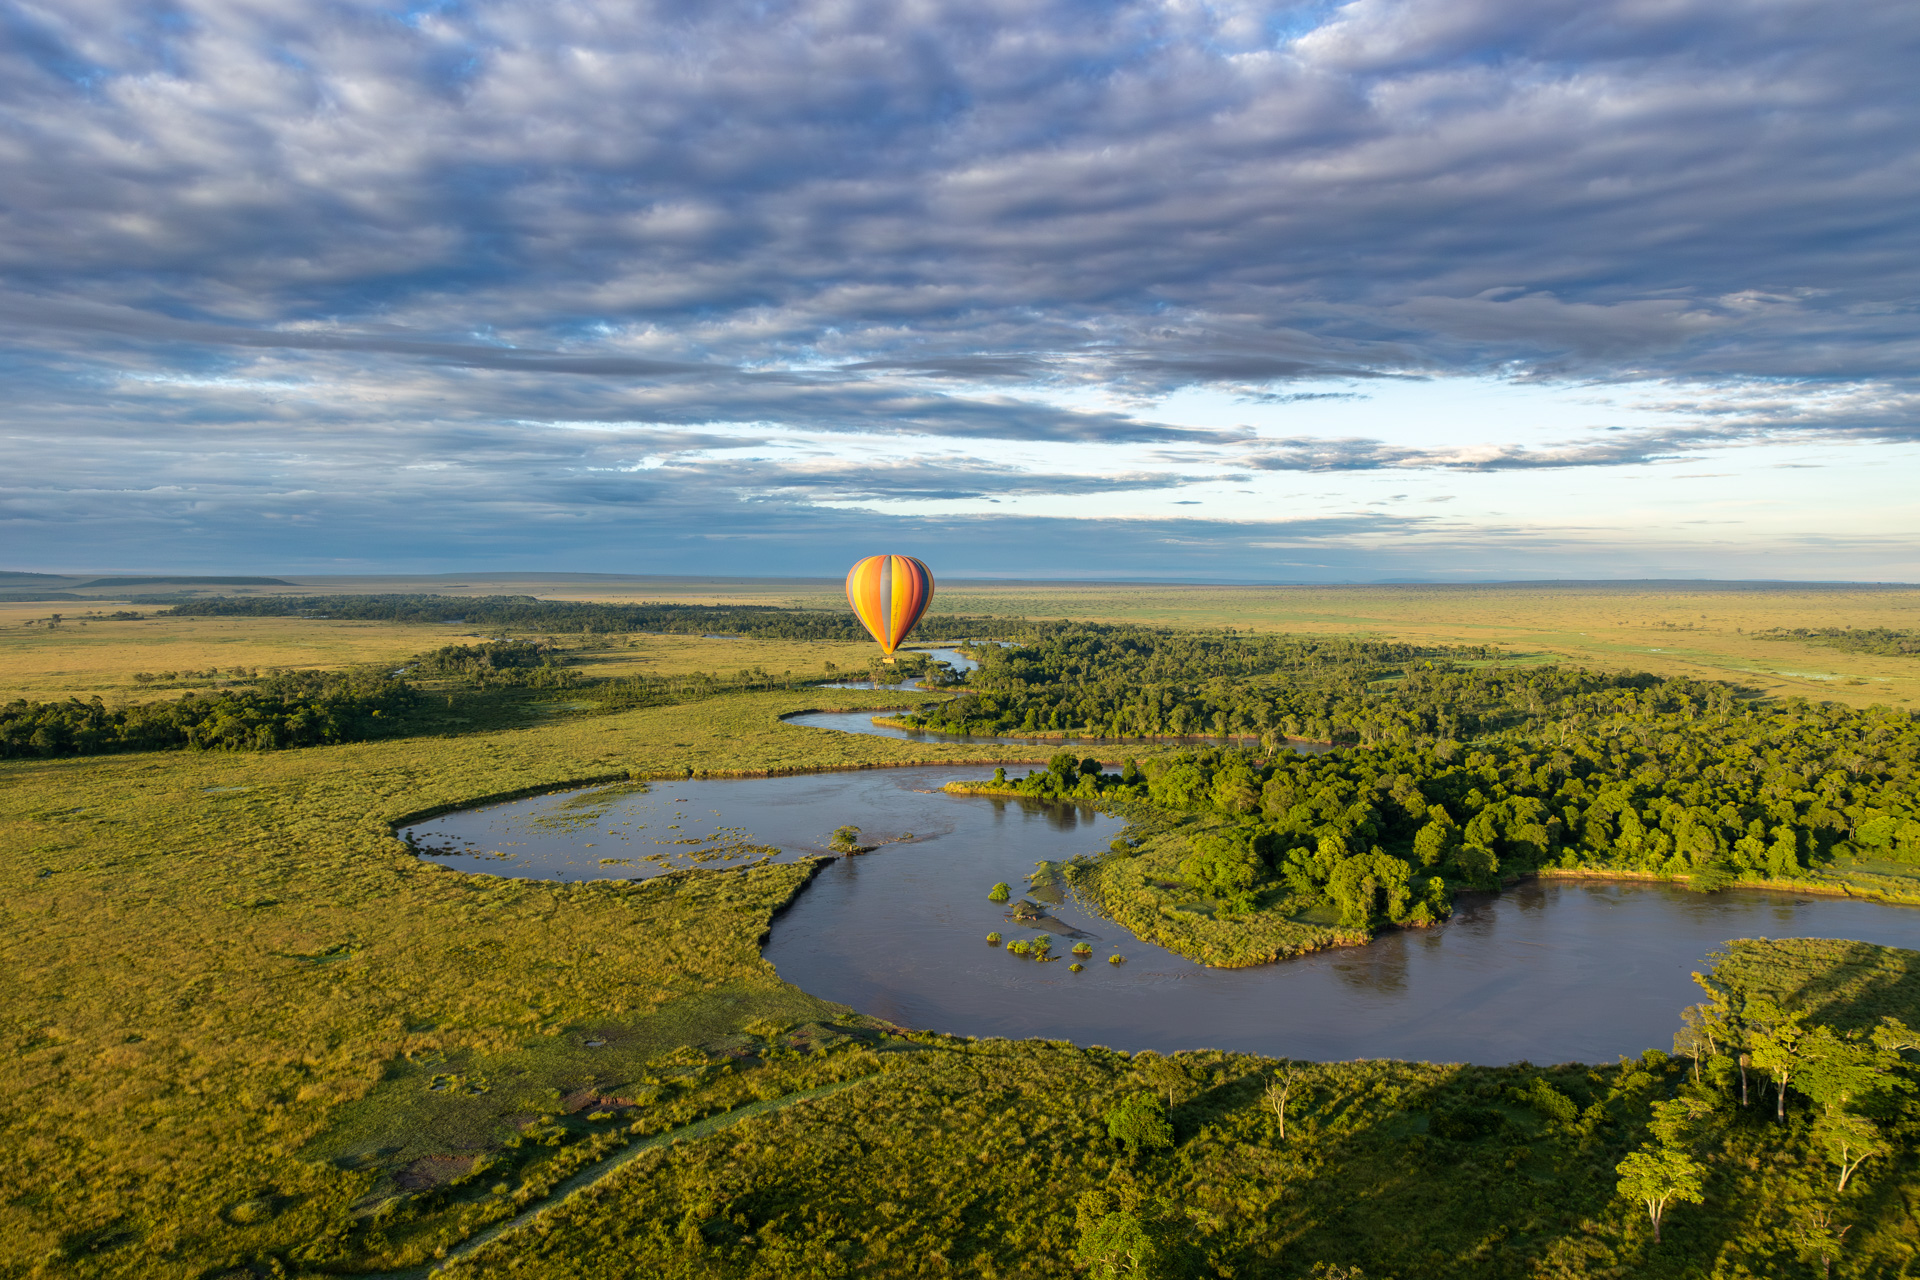 Above: The Mara River is fit to burst and the best way to see it is from the sky